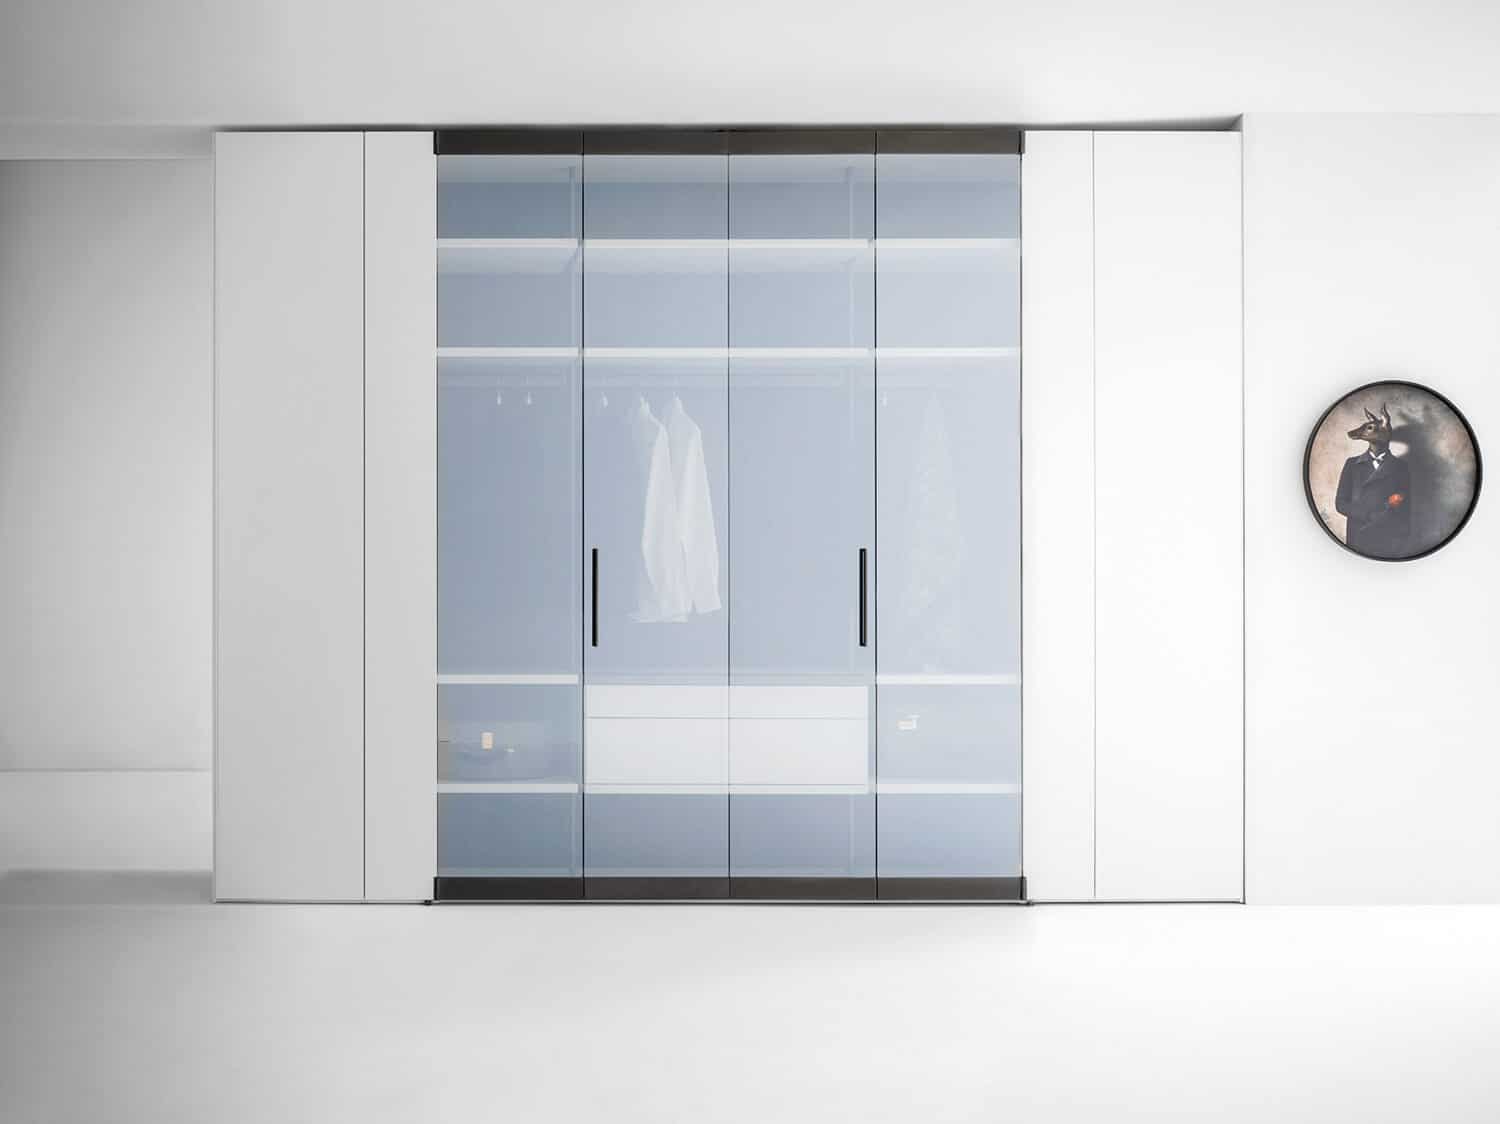 The transparency of the bifold glass doors increases the aesthetic value of the closet.